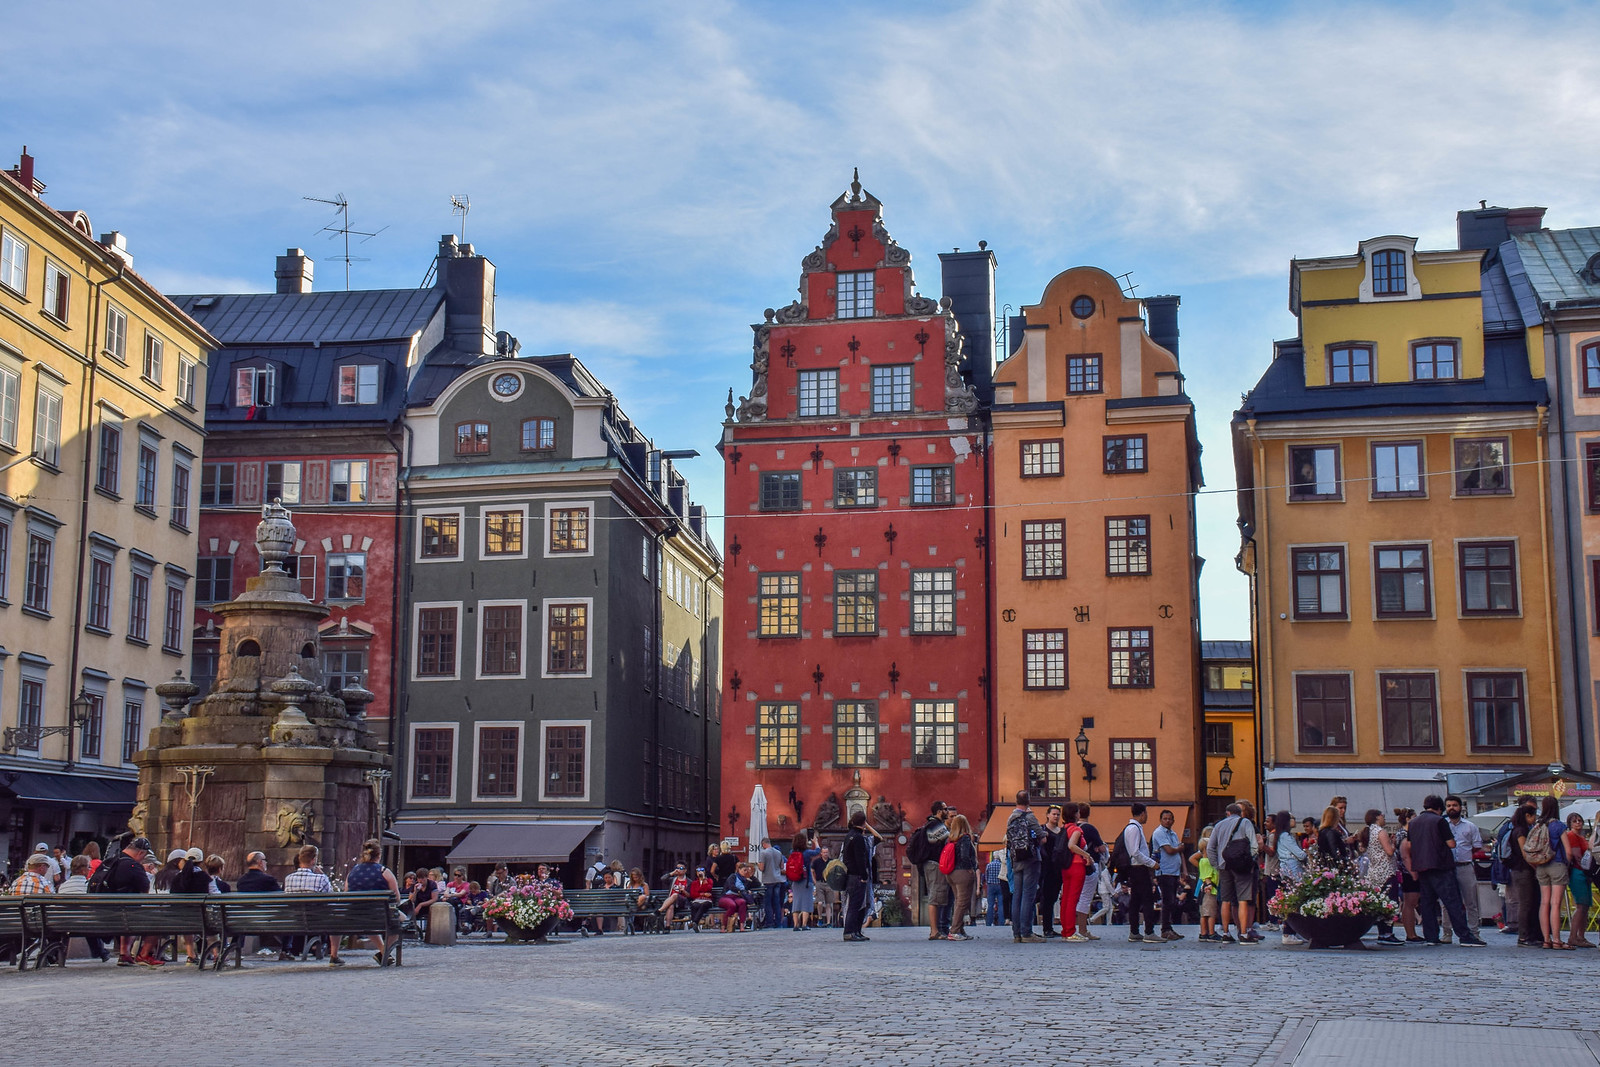 Stortorget, the main square in Gamla Stan